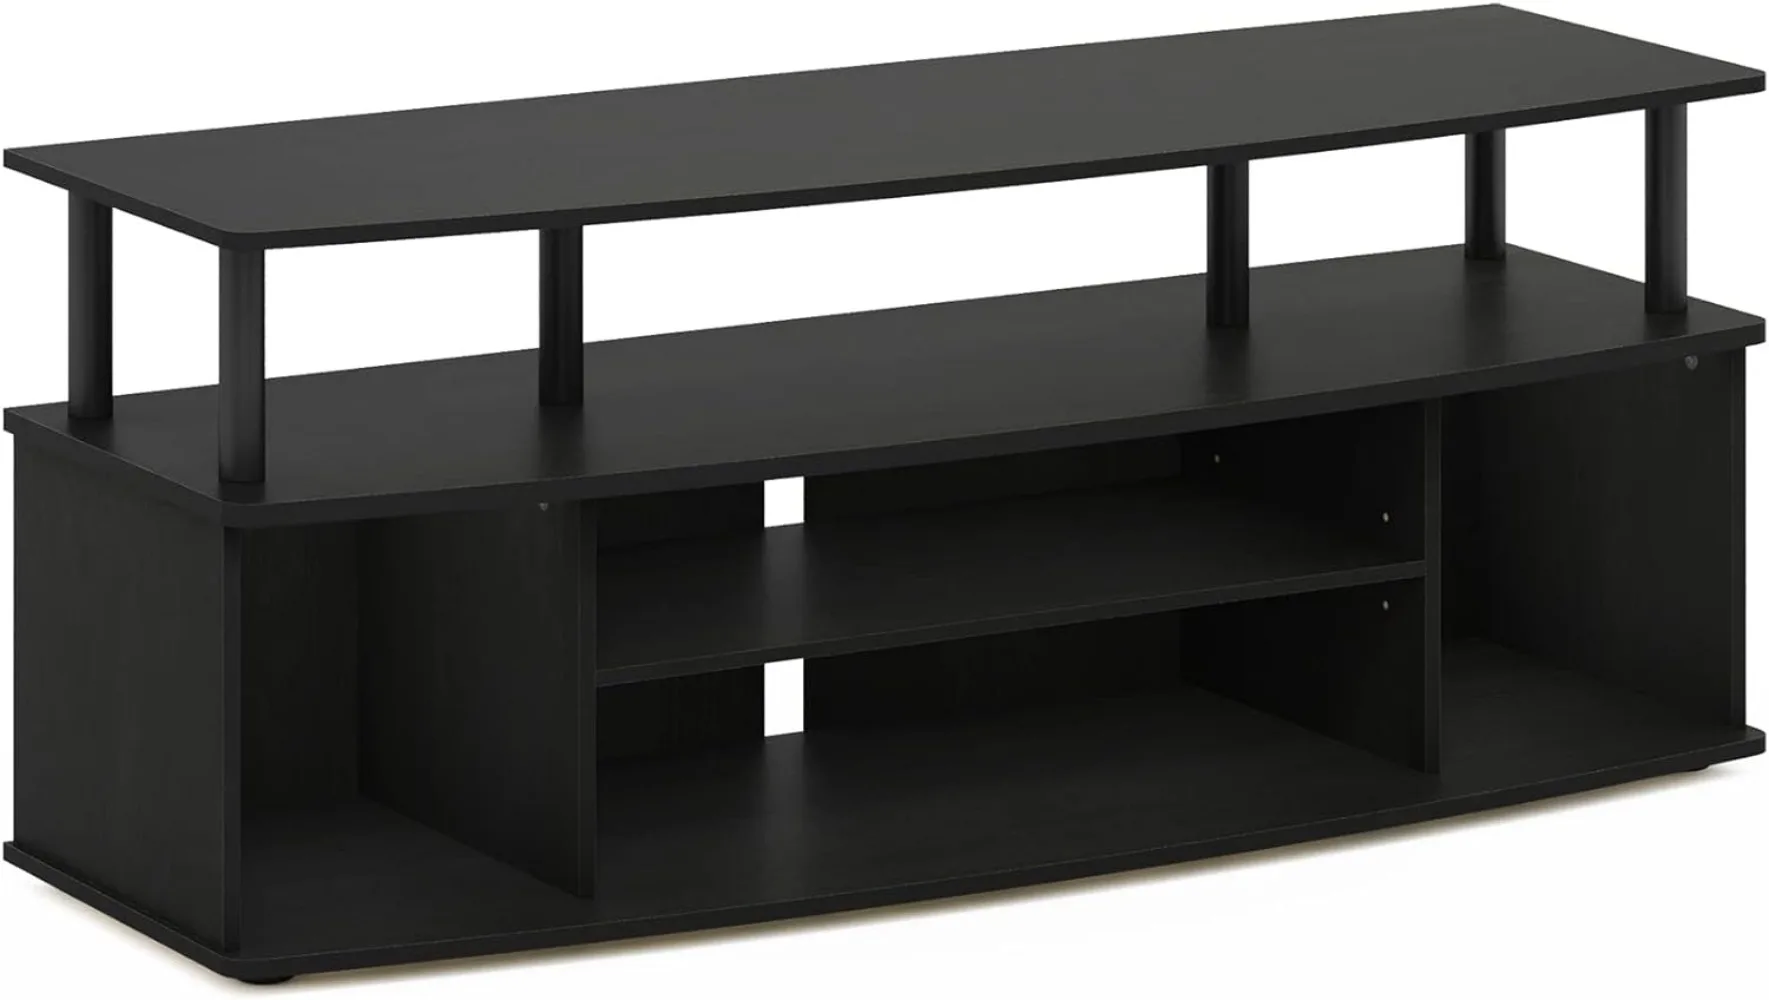 

Furinno Jaya Large Entertainment Center Hold Up To 55-in TV,47.24(W) X 19.53(H) X 15.87(D) Inches Inches, Blackwood